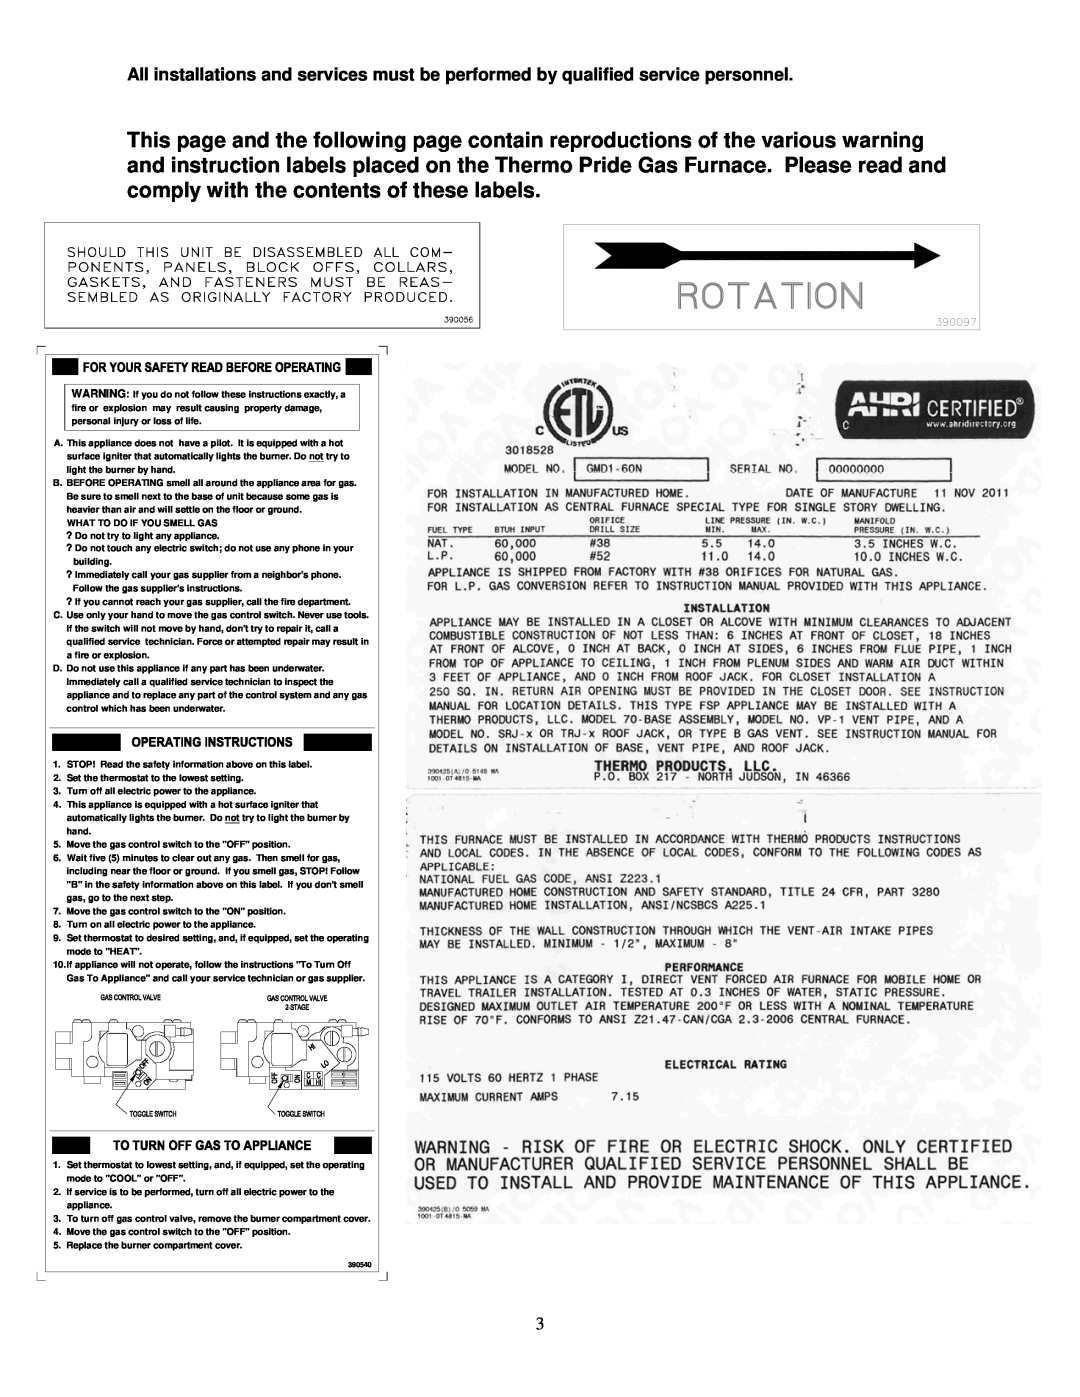 Thermo Products GDM1-80N, GMD1-60N service manual What To Do If You Smell Gas 